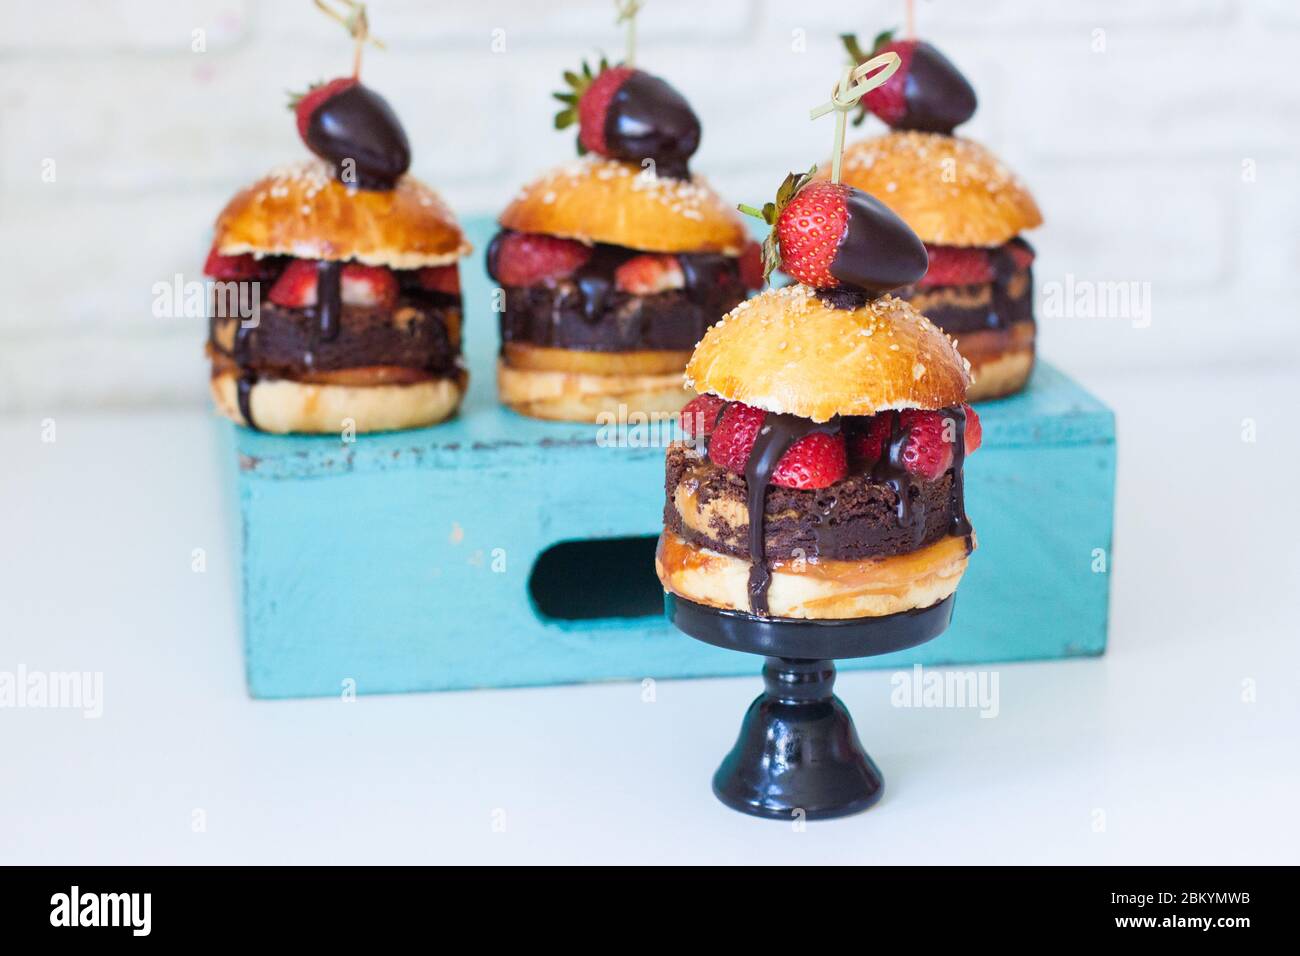 Sweet burger with vanilla bun, brownie layer, strawberries in chocolate and salted caramel. Stock Photo